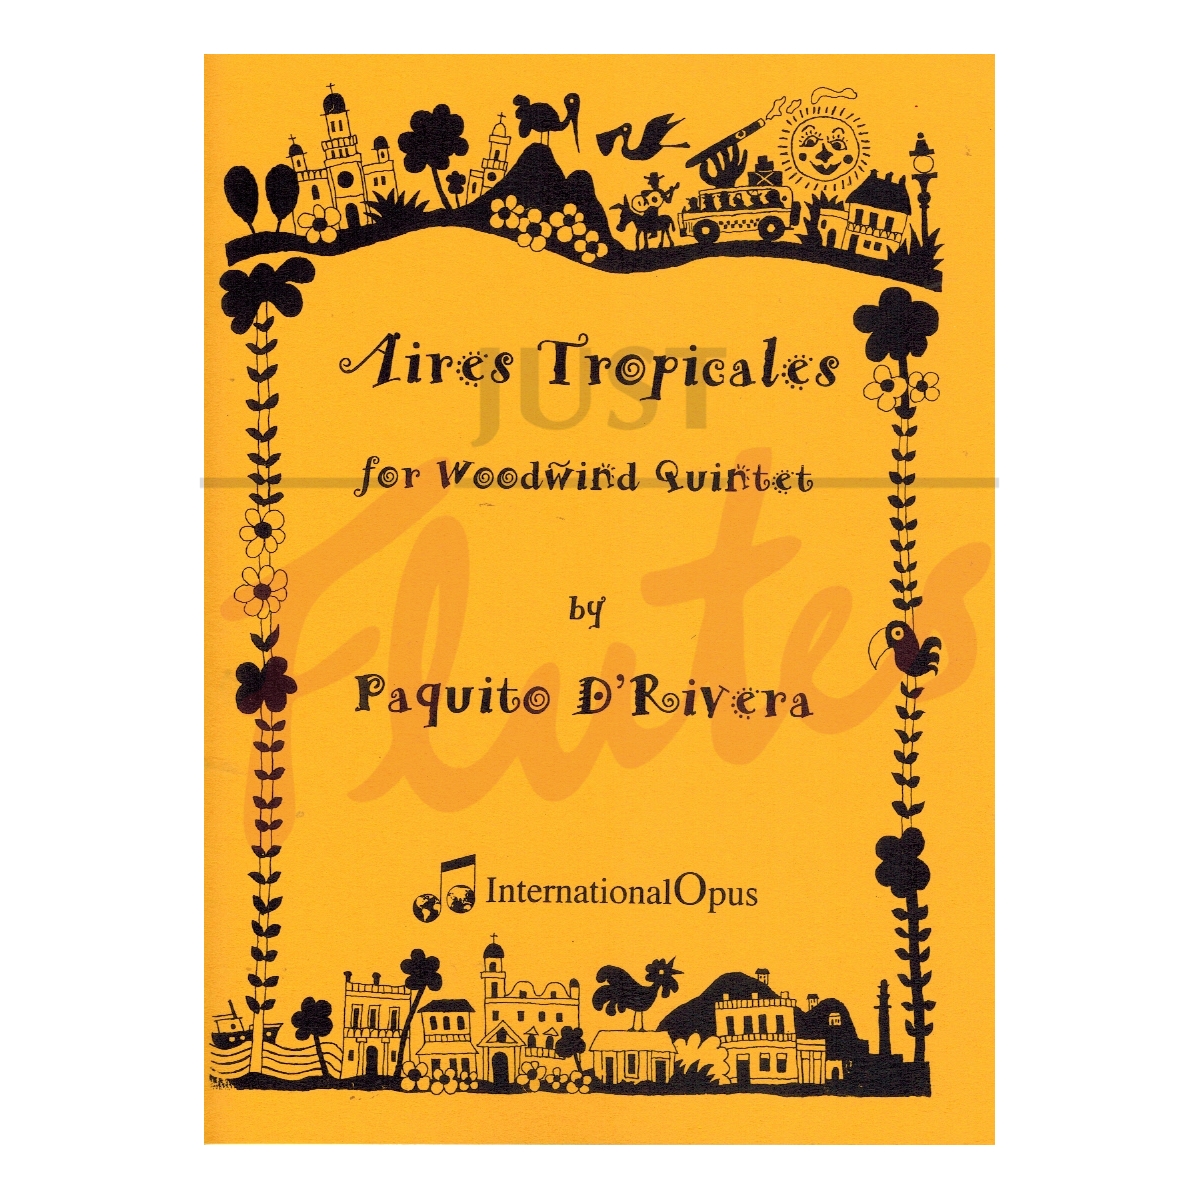 Aires Tropicales for Woodwind Quintet